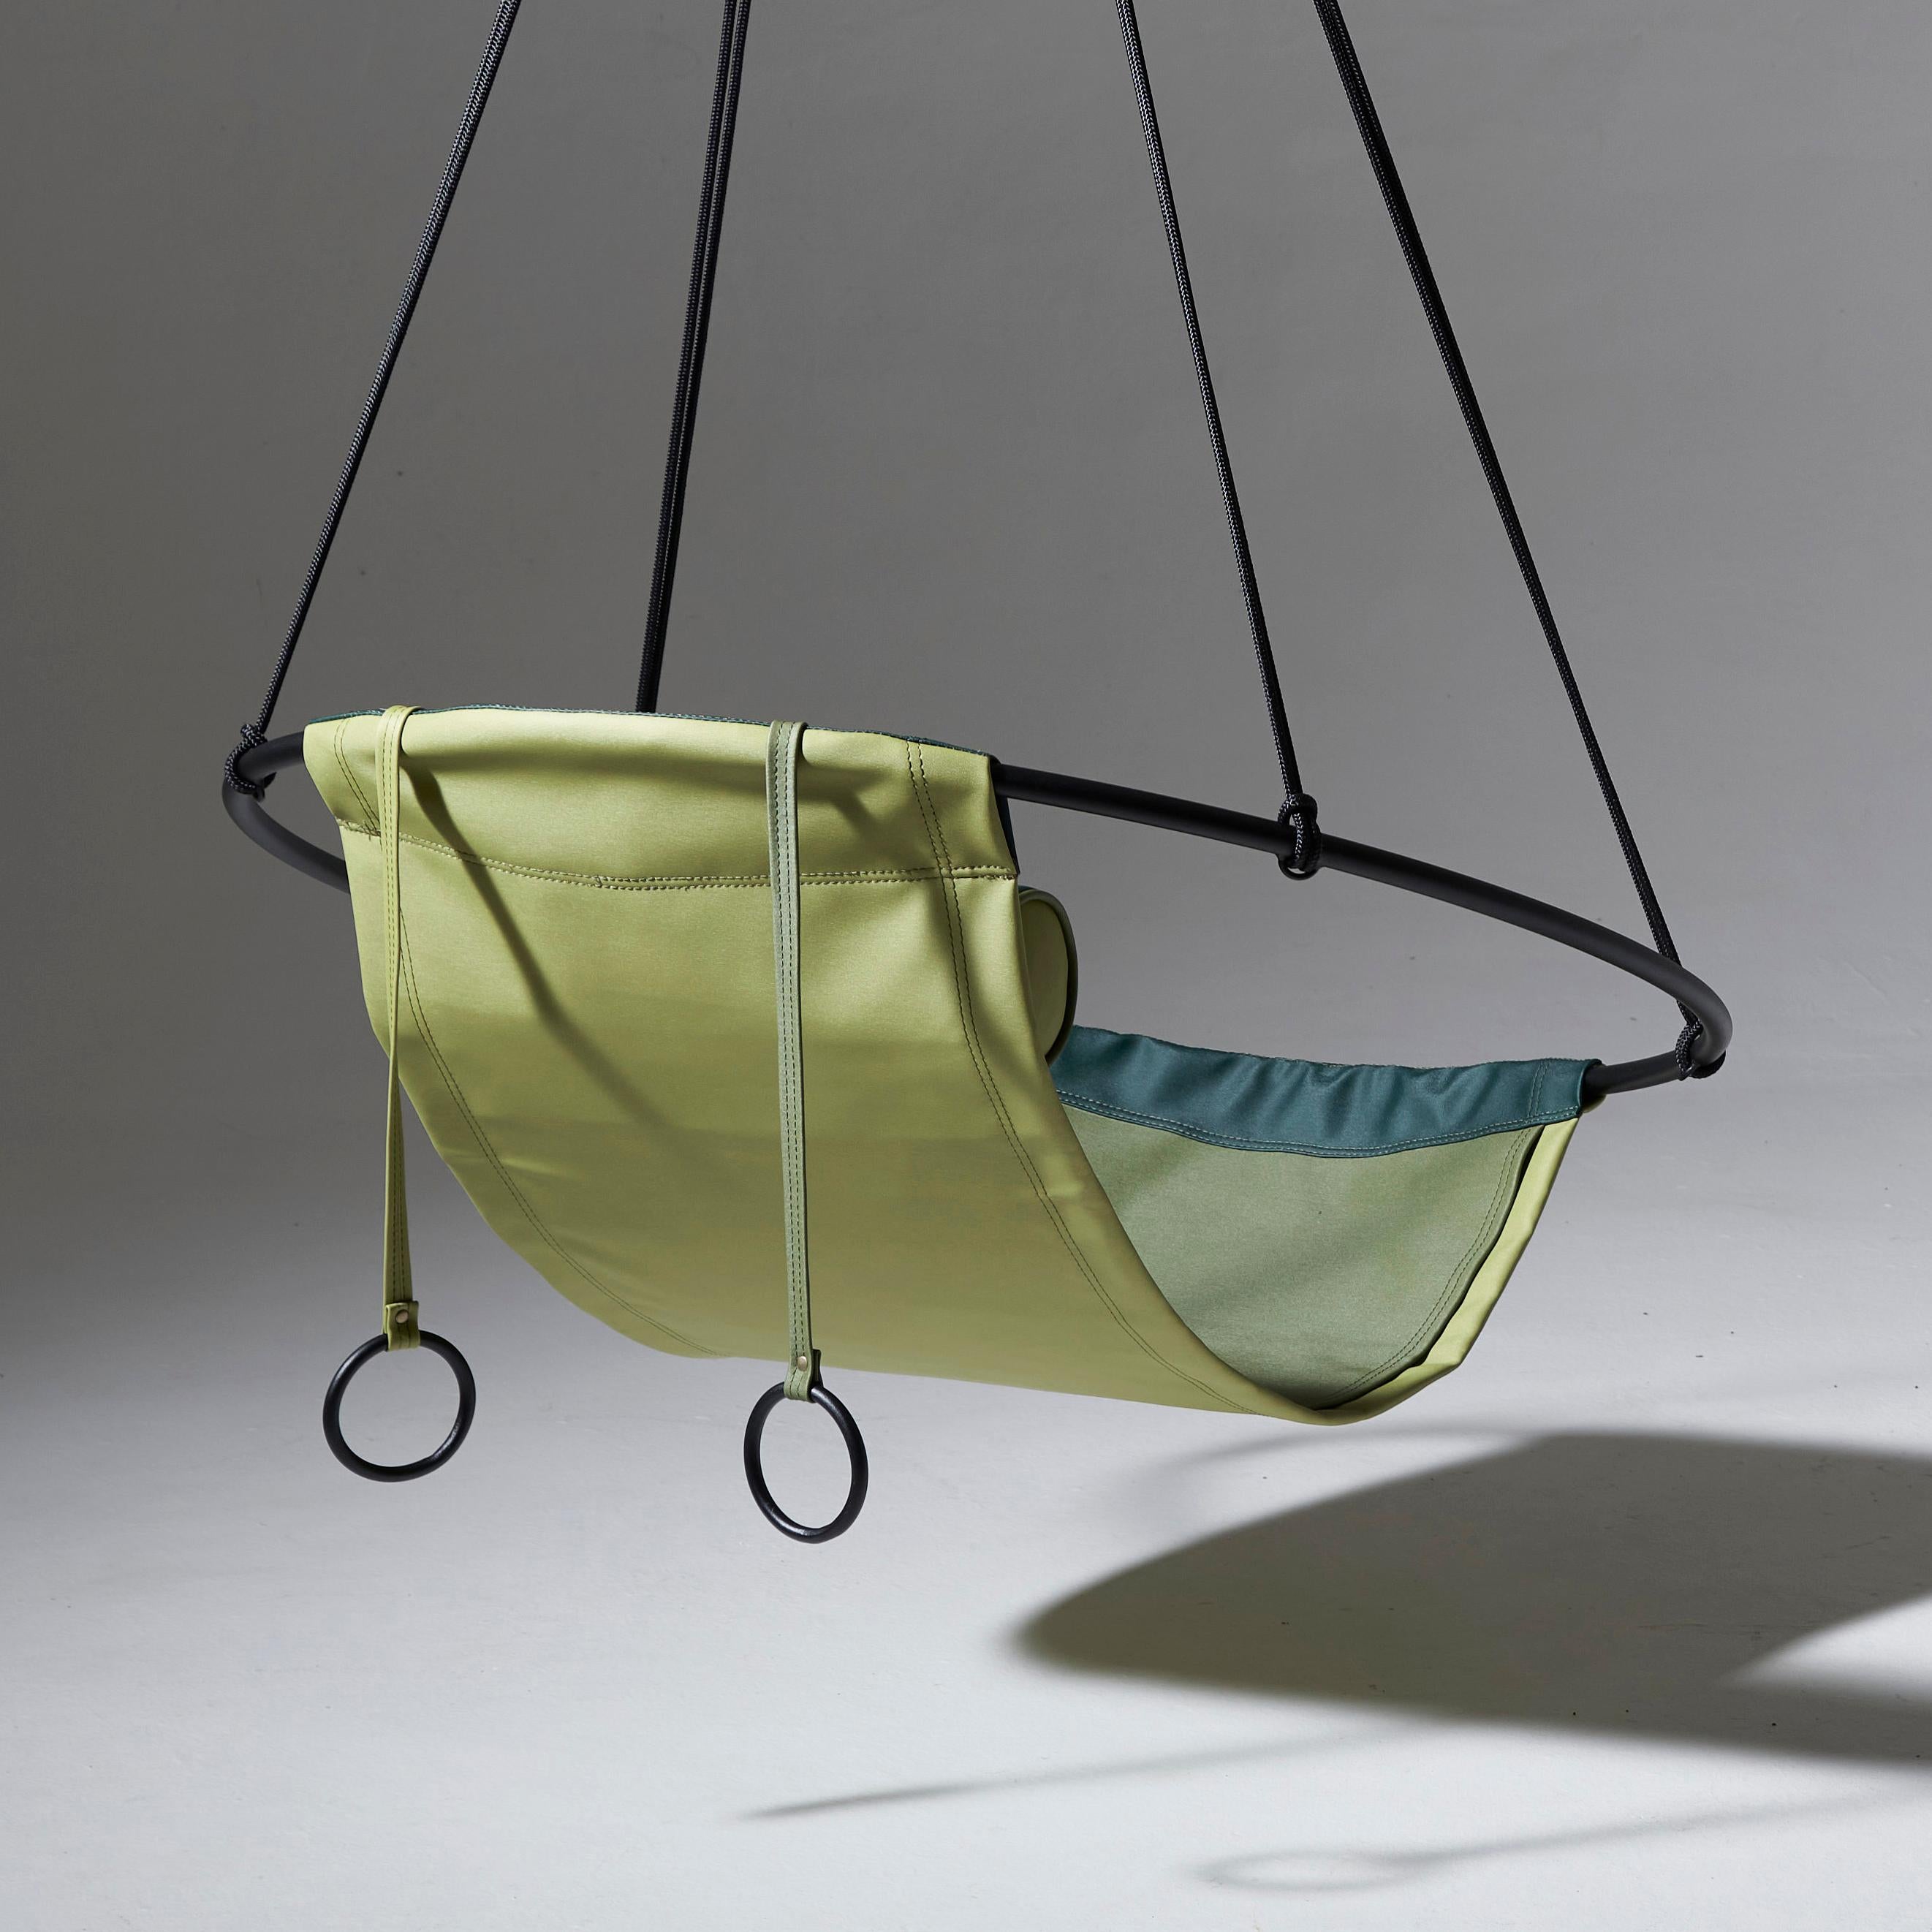 South African Modern, Outdoor Swing Chair - Perfect for the pool For Sale